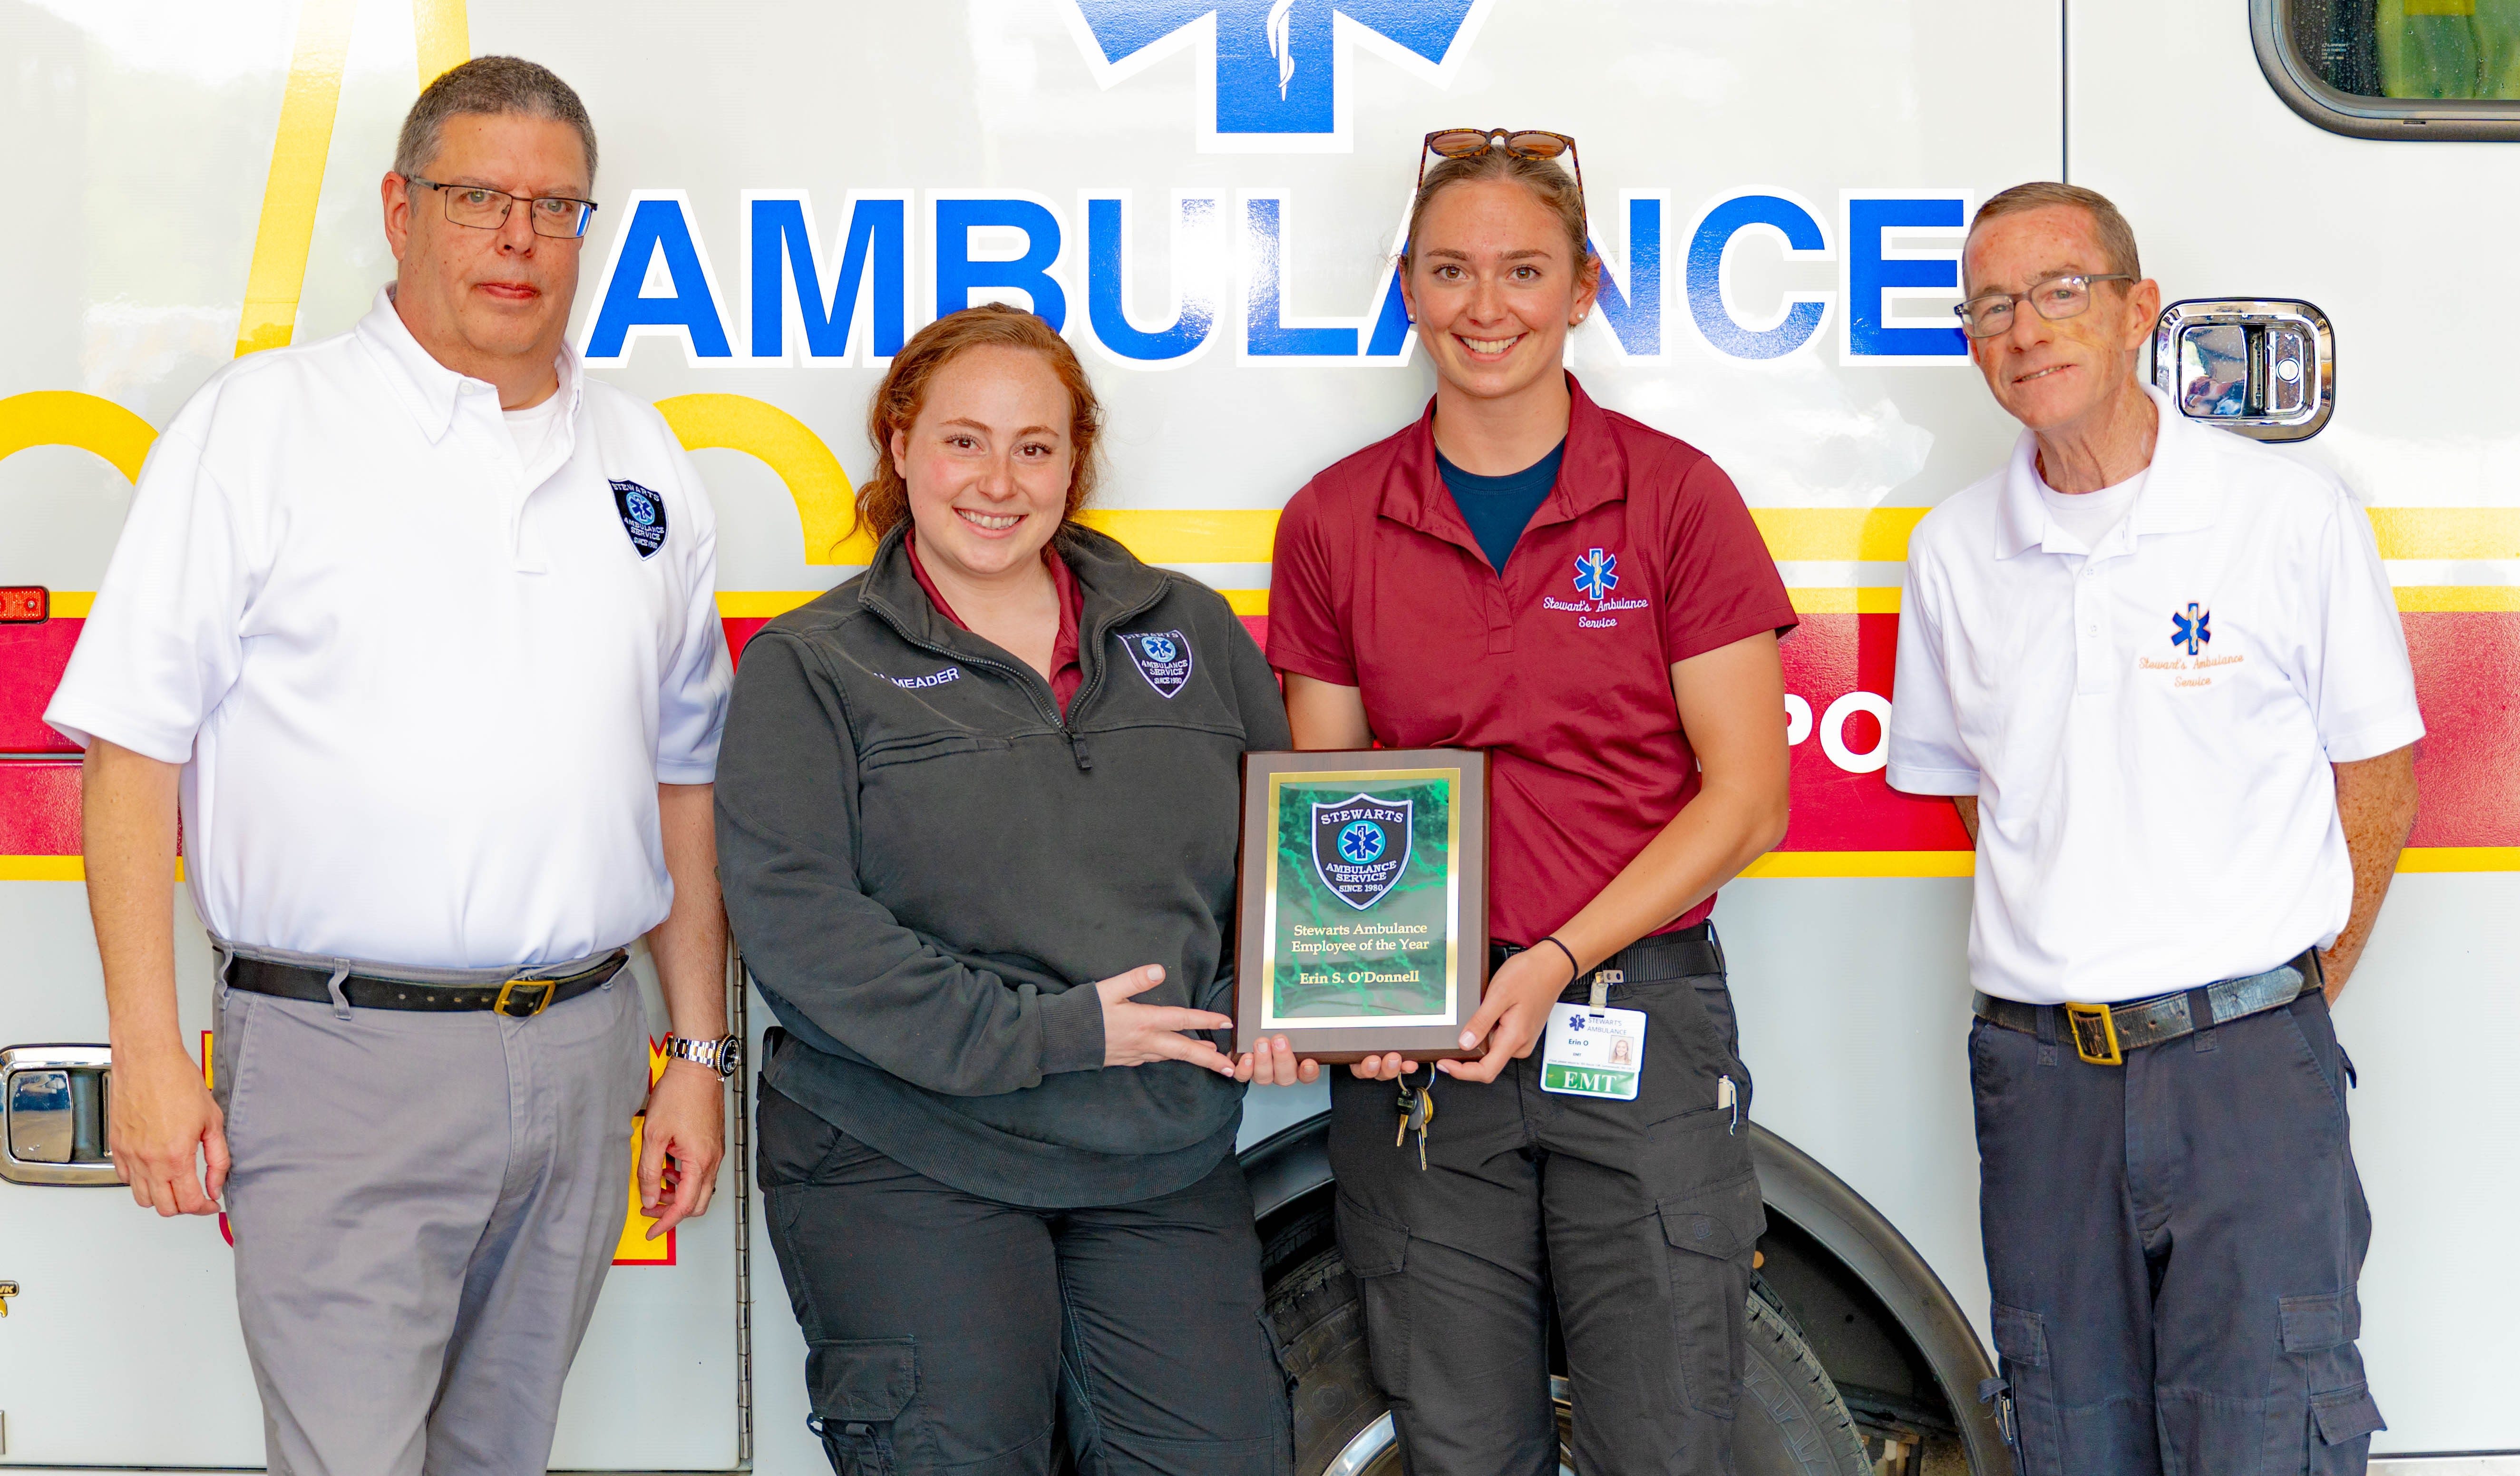 Anthem Hero, Emergency Medical Services Provider of the Year: Seacoast health news